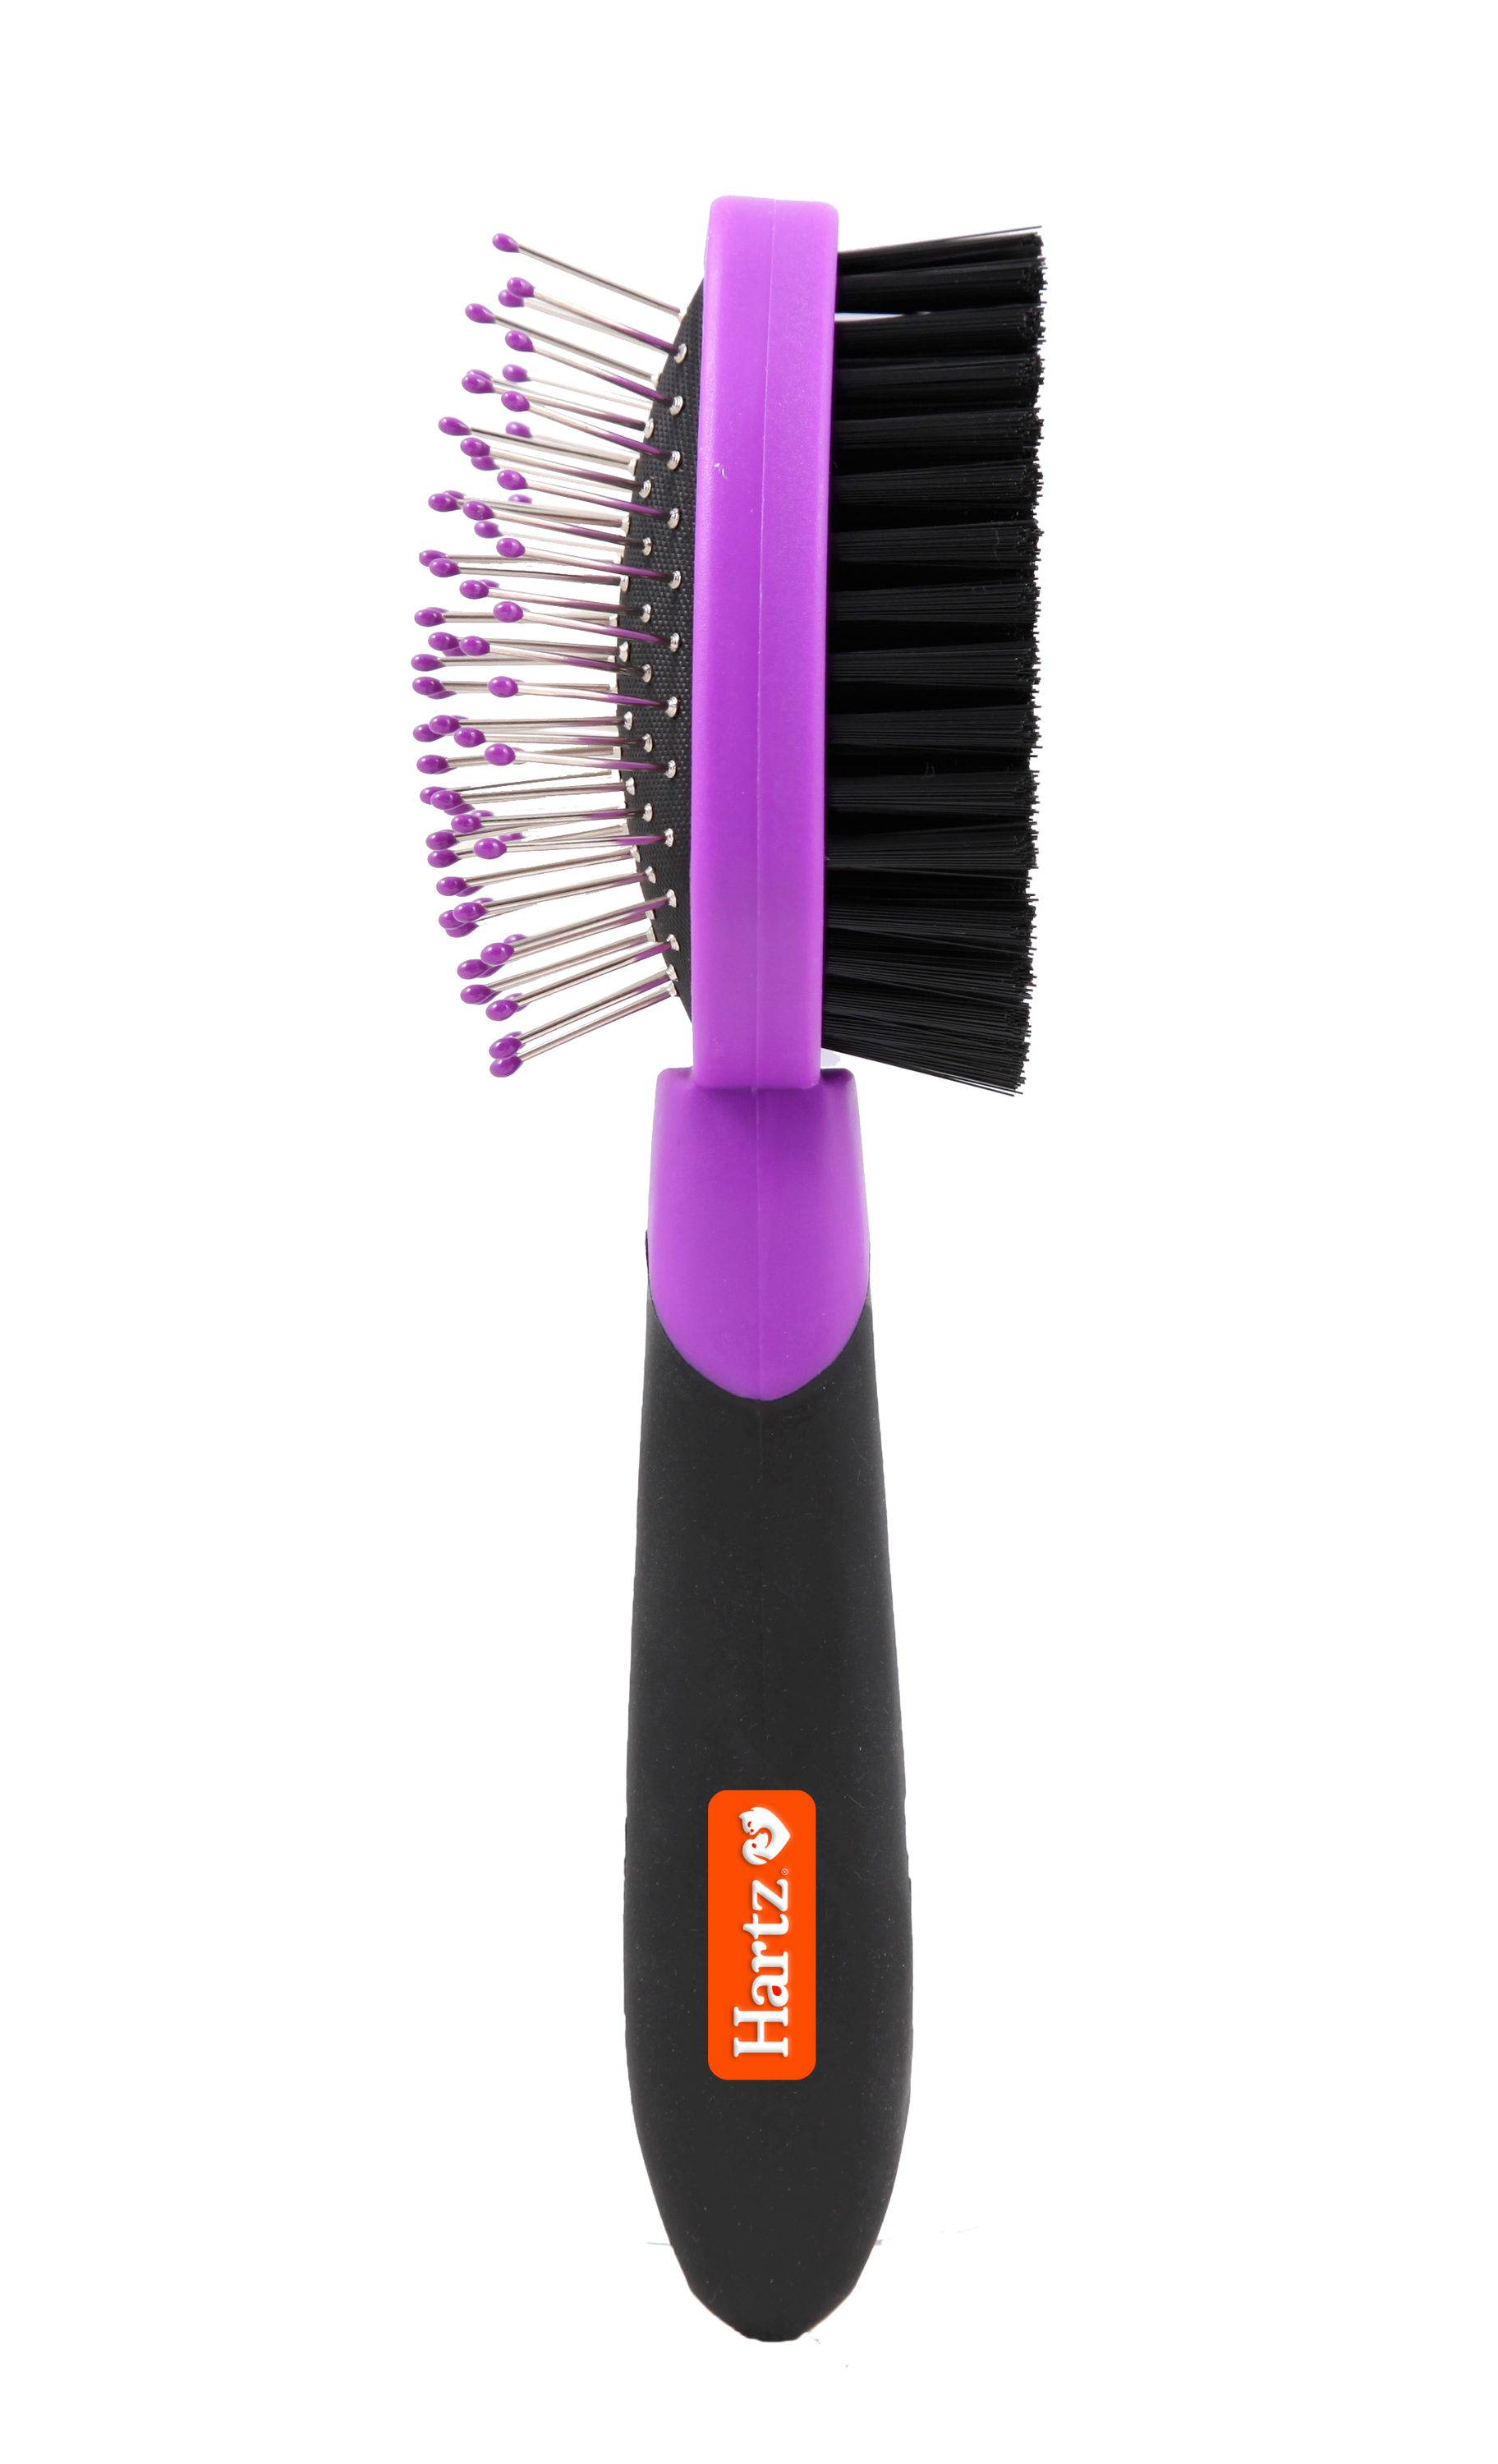 Hartz Groomer's Best Combo Grooming Brush for Cats and Small Dogs - image 1 of 8